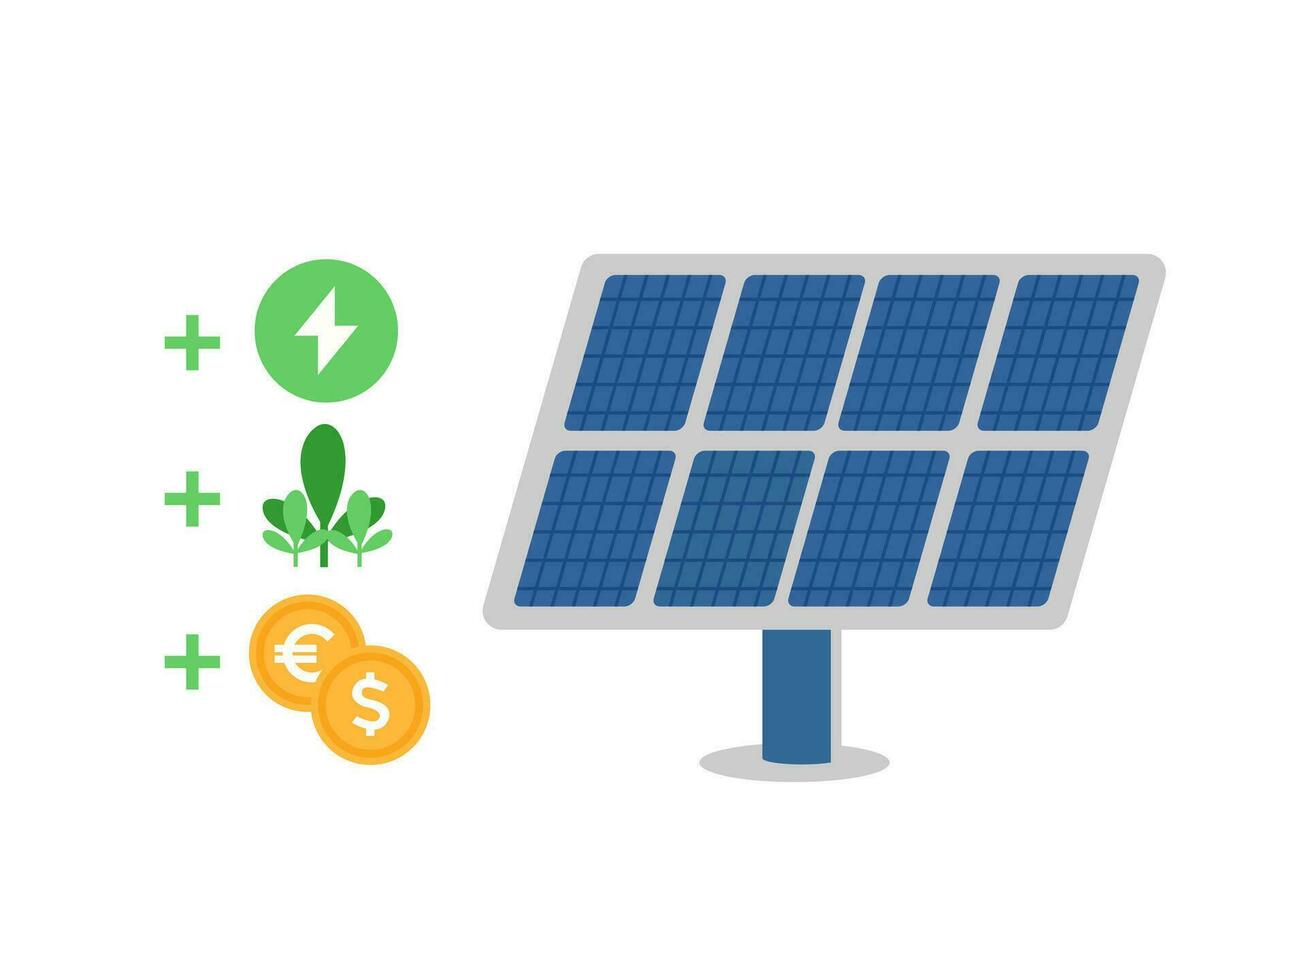 Benefits of using pv panels. Pv cell panels for sustainable energy, sustainable climate and saving money concept. Vector illustration.